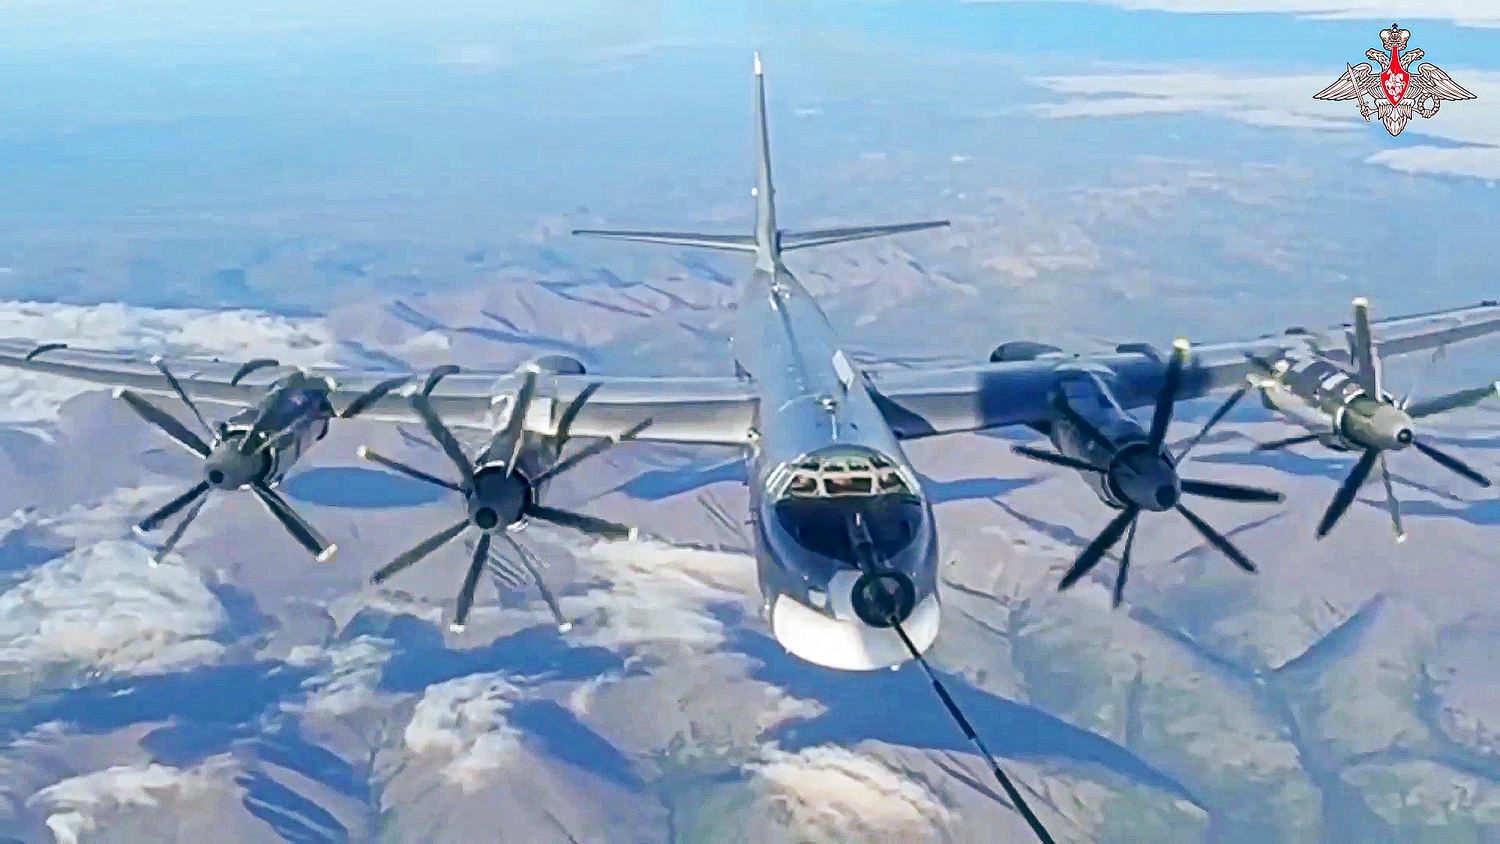 Russian and Chinese nuclear-capable bombers patrol near United States